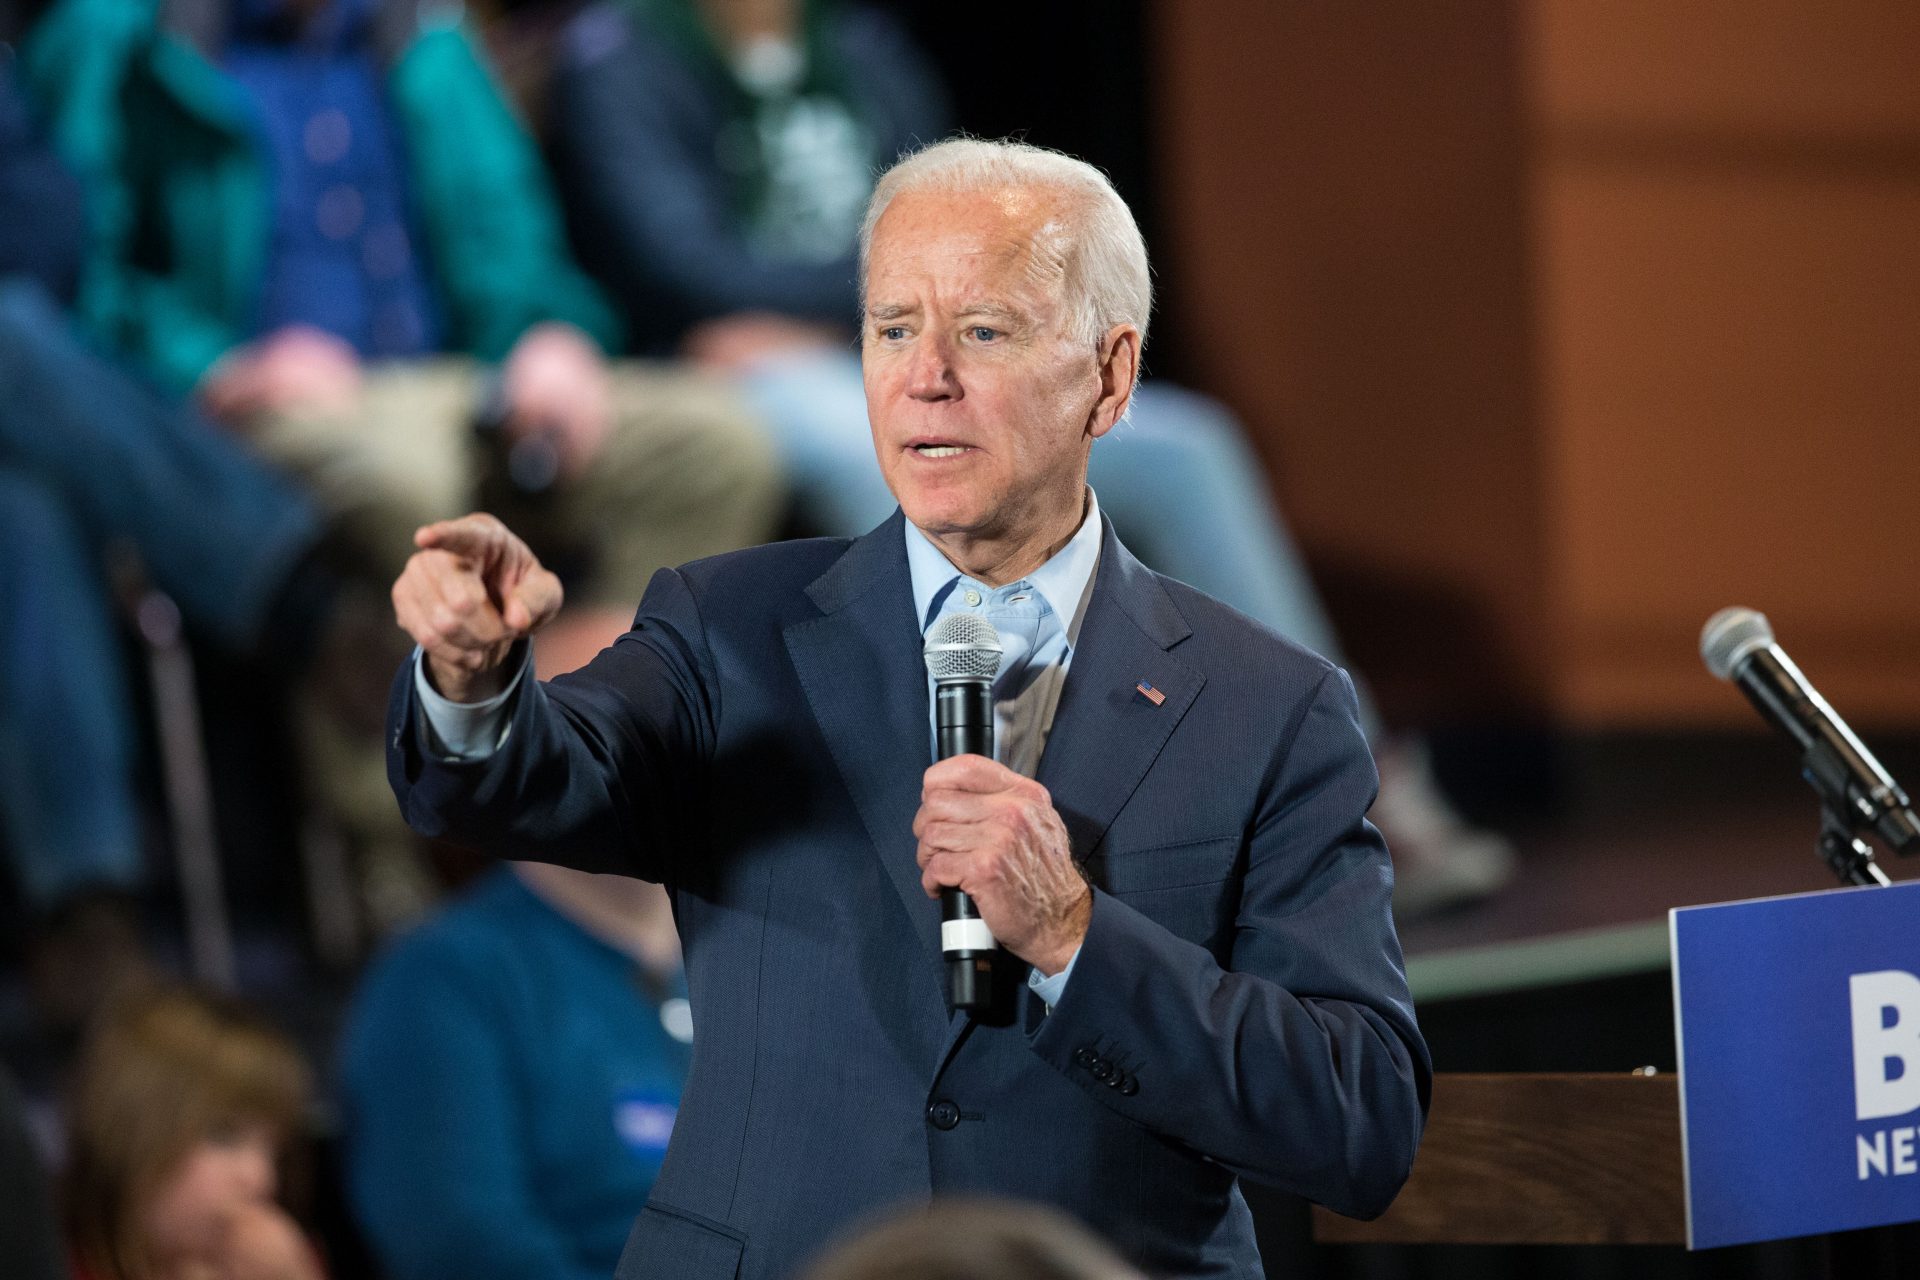 Why is Biden taking a new approach?